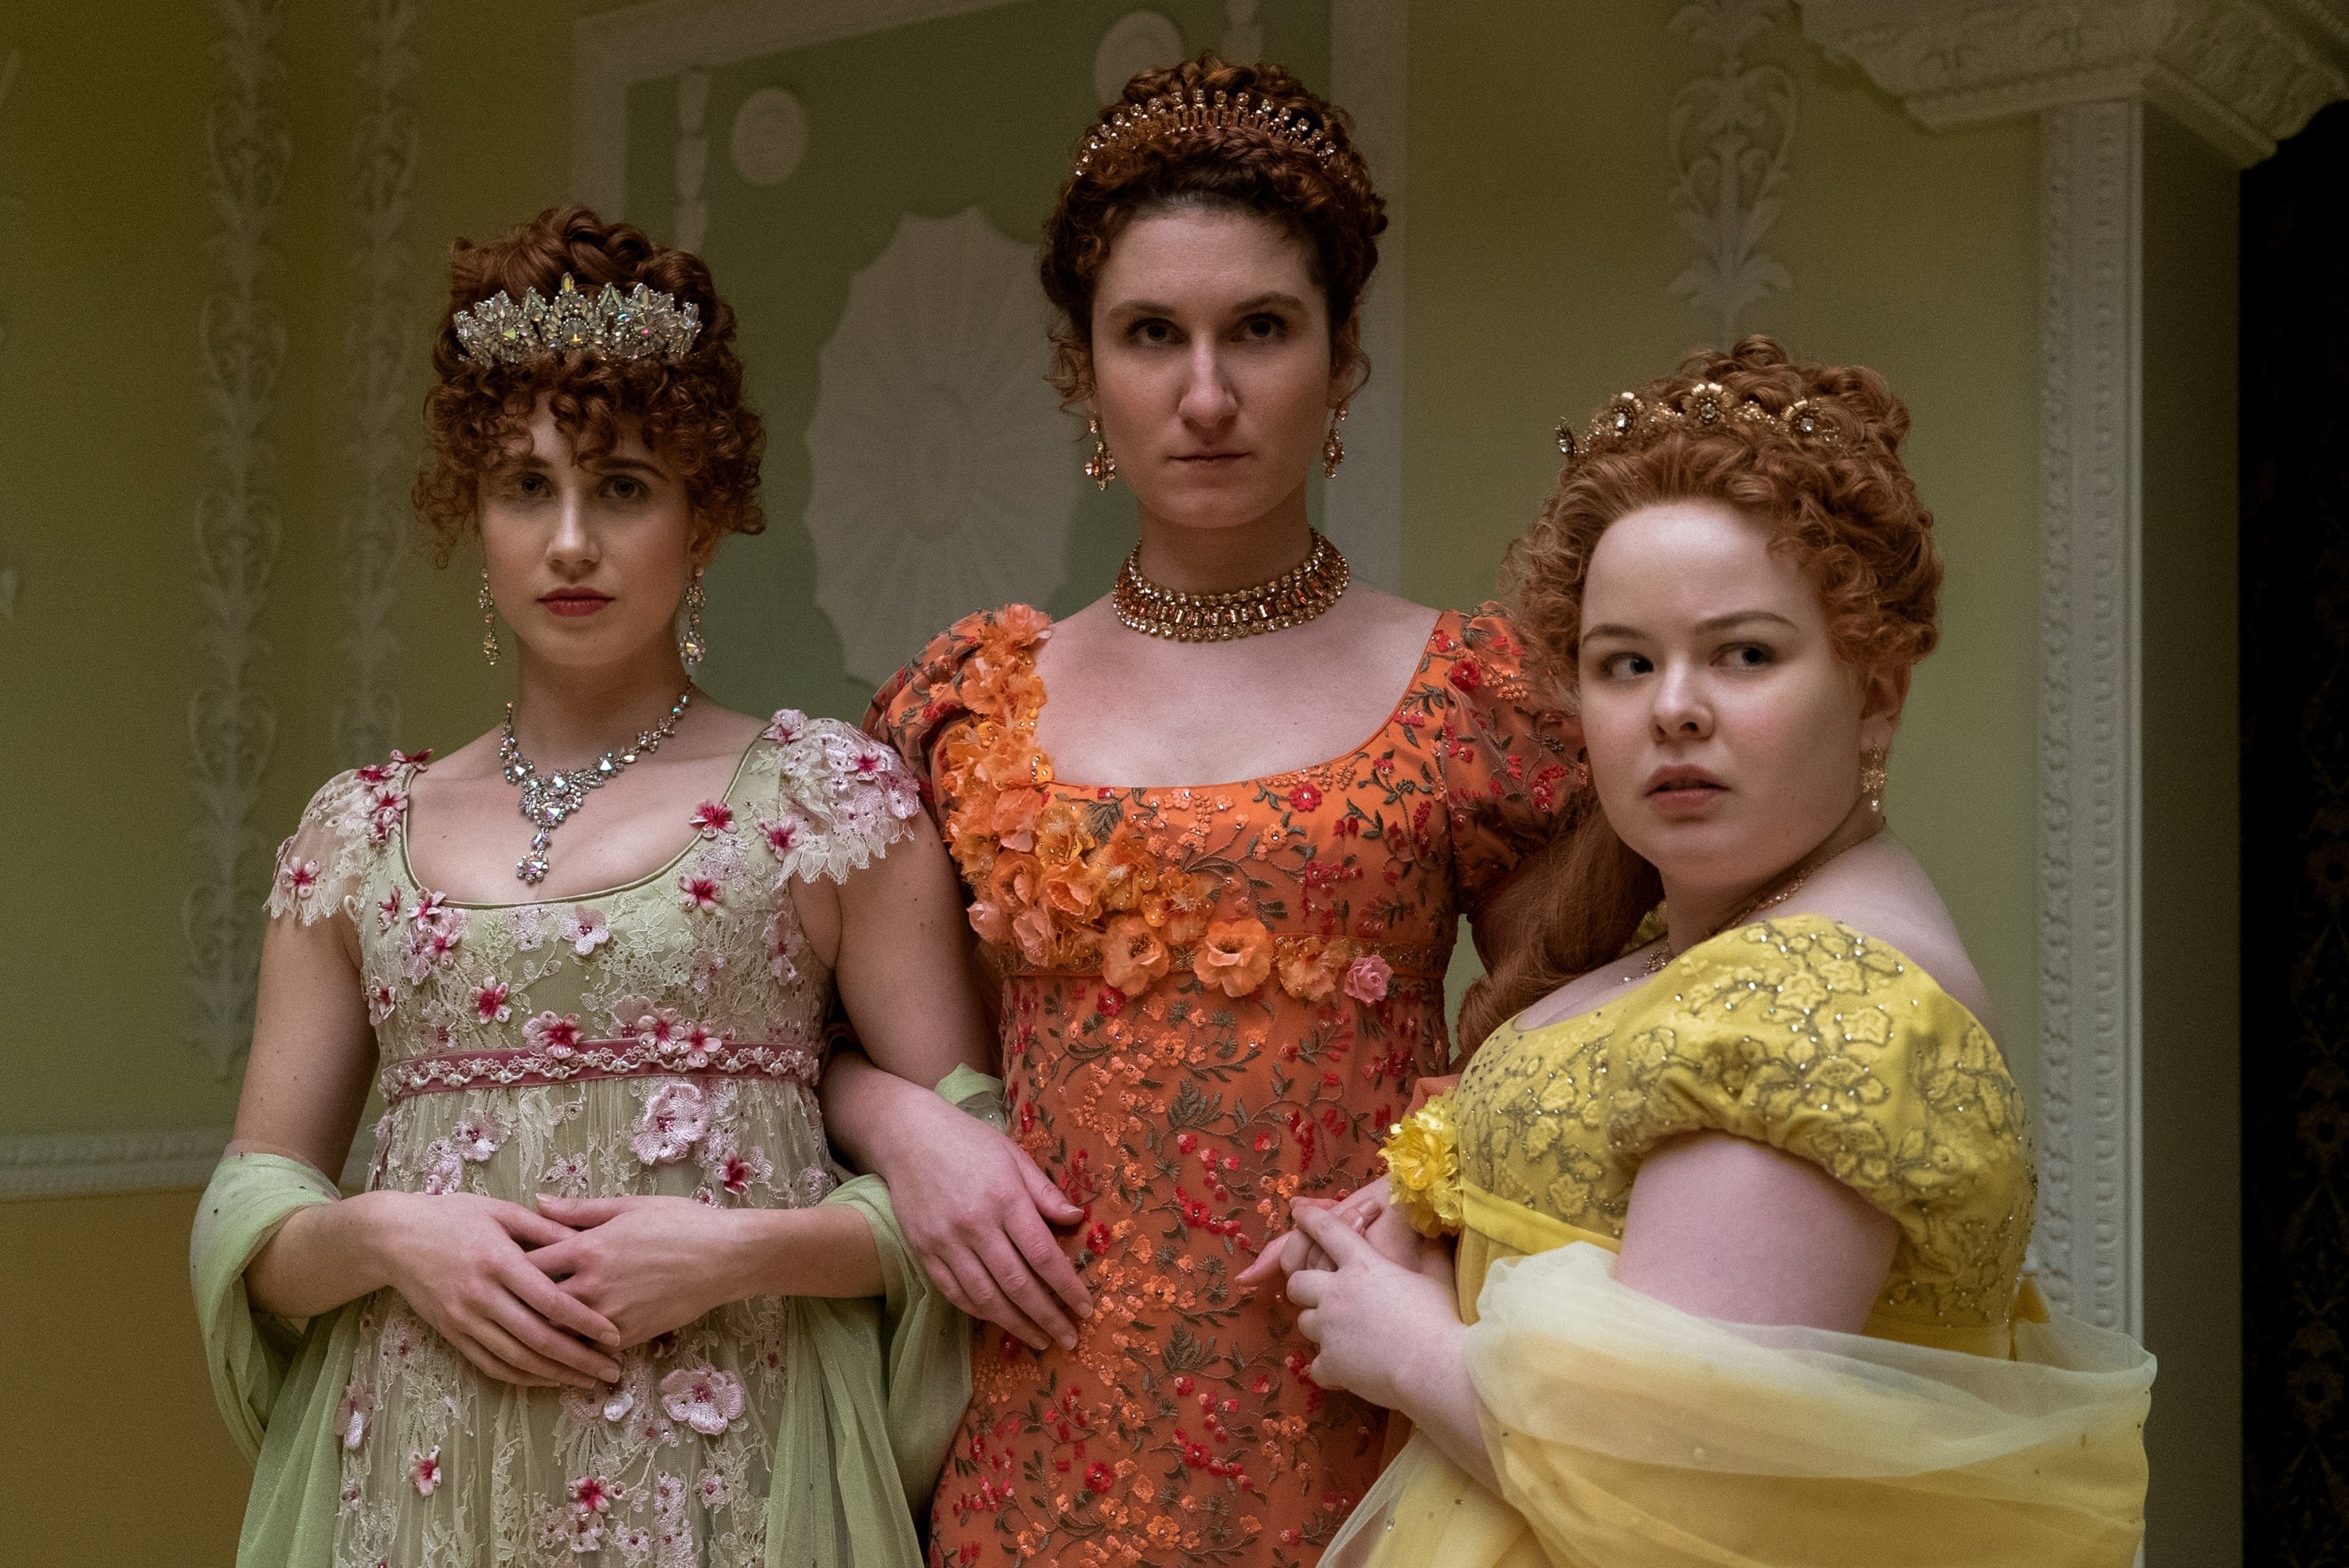 Three characters from Bridgerton in period attire, with intricate gowns and headpieces, standing together